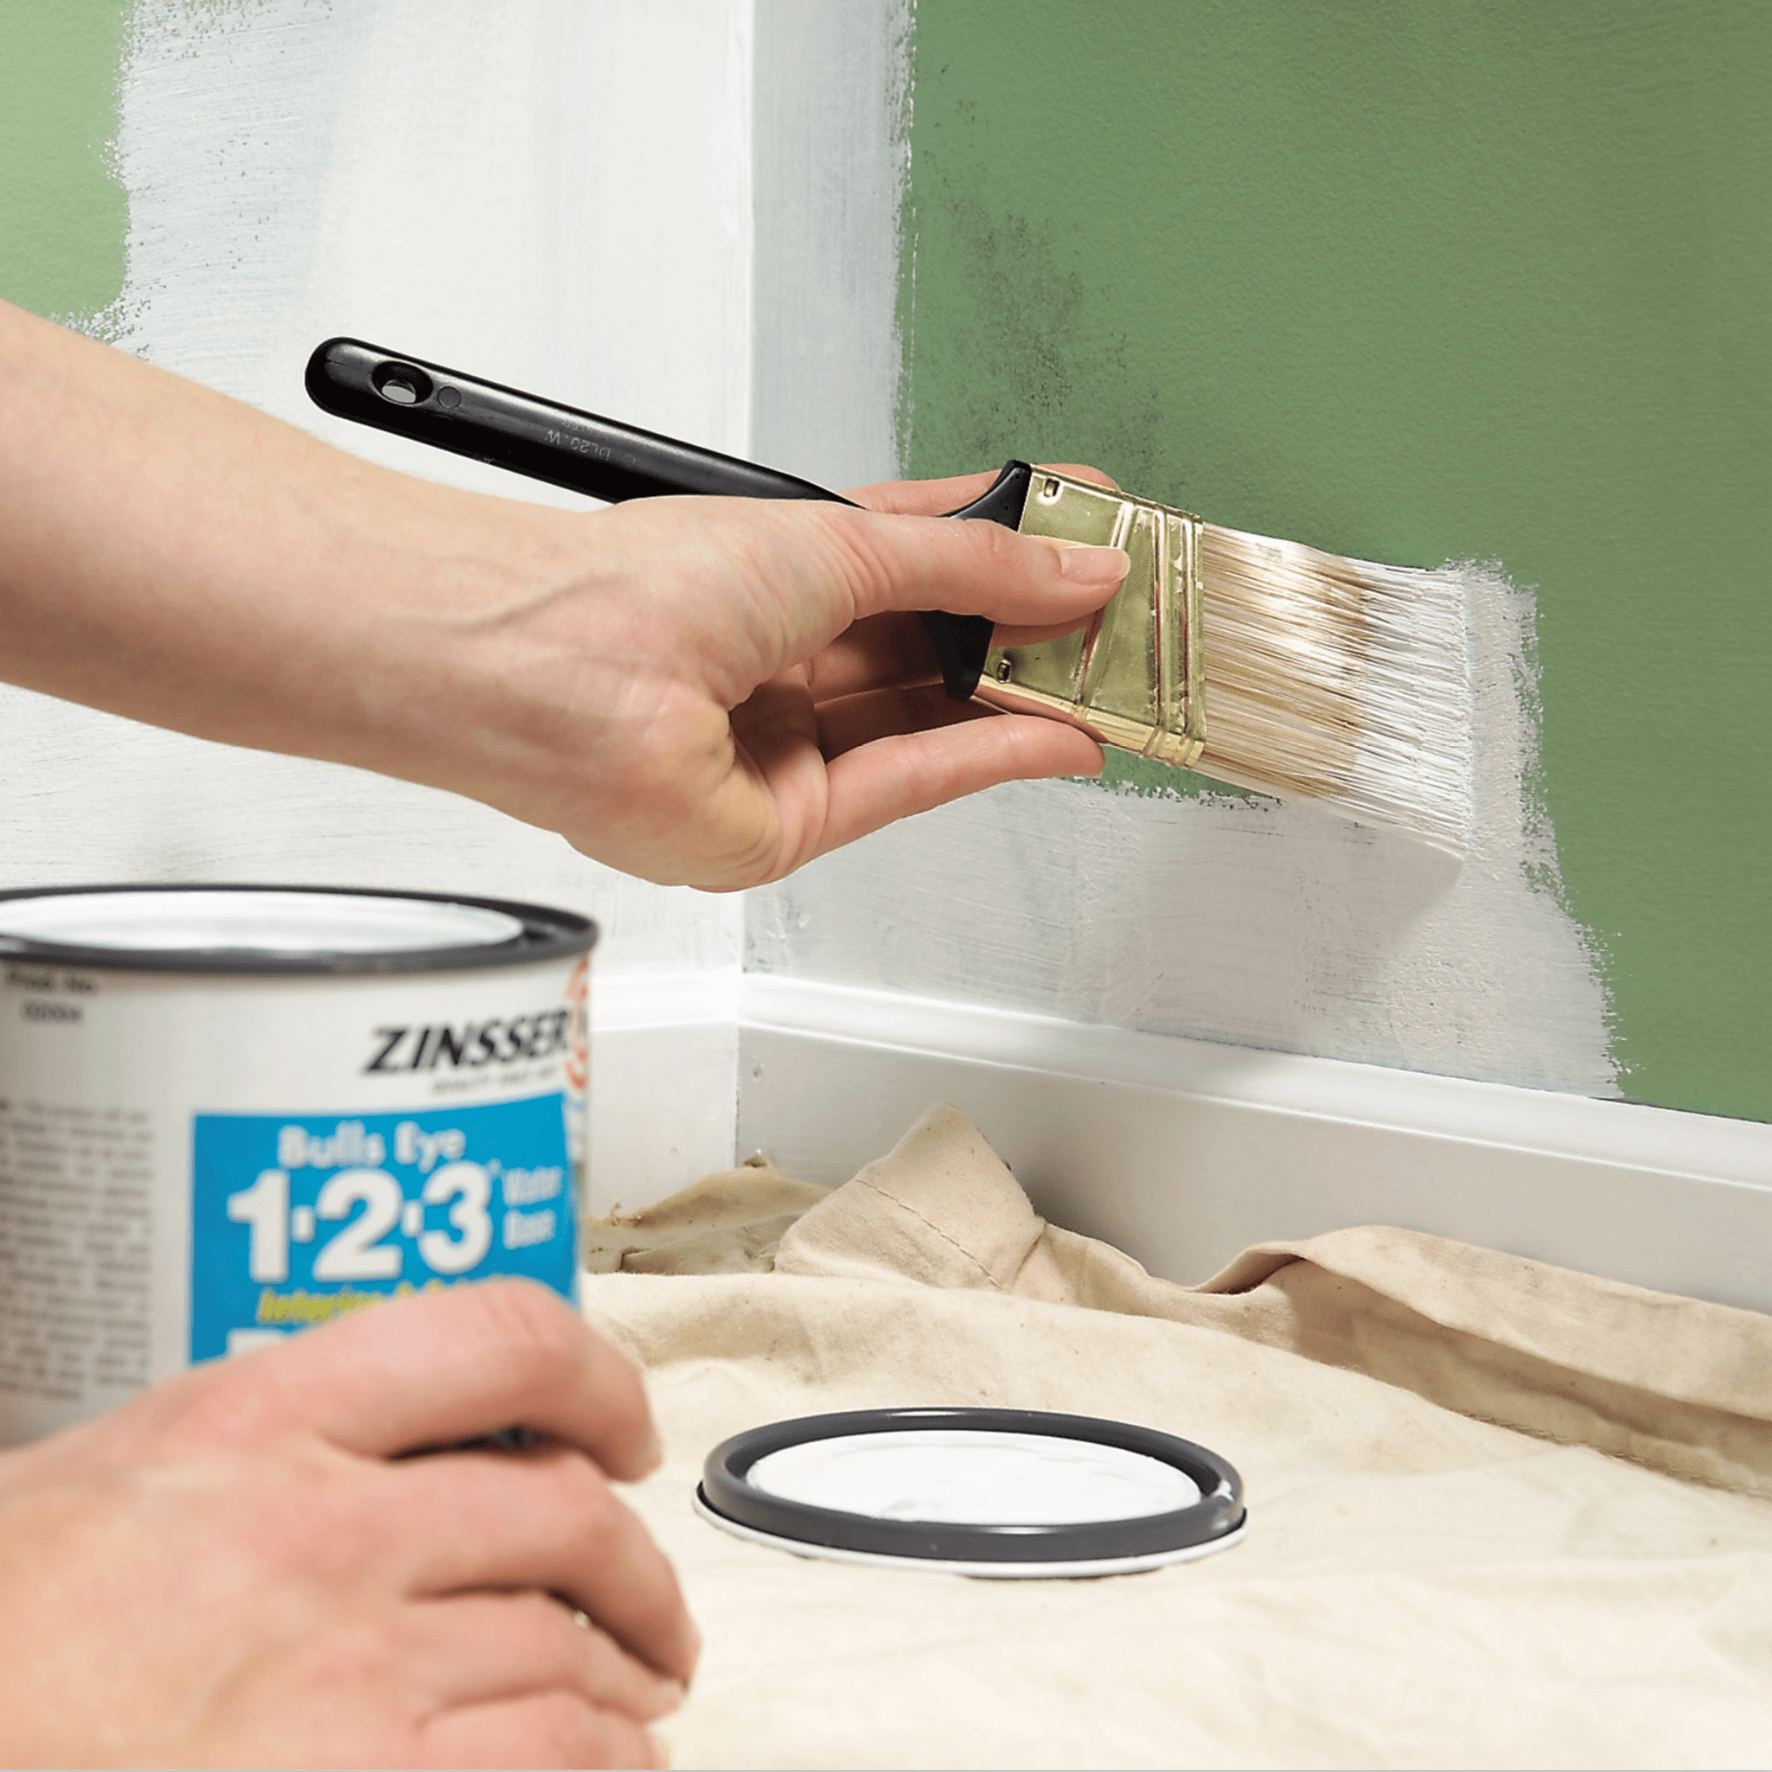 What Does Paint Primer Do and When Do You Need It